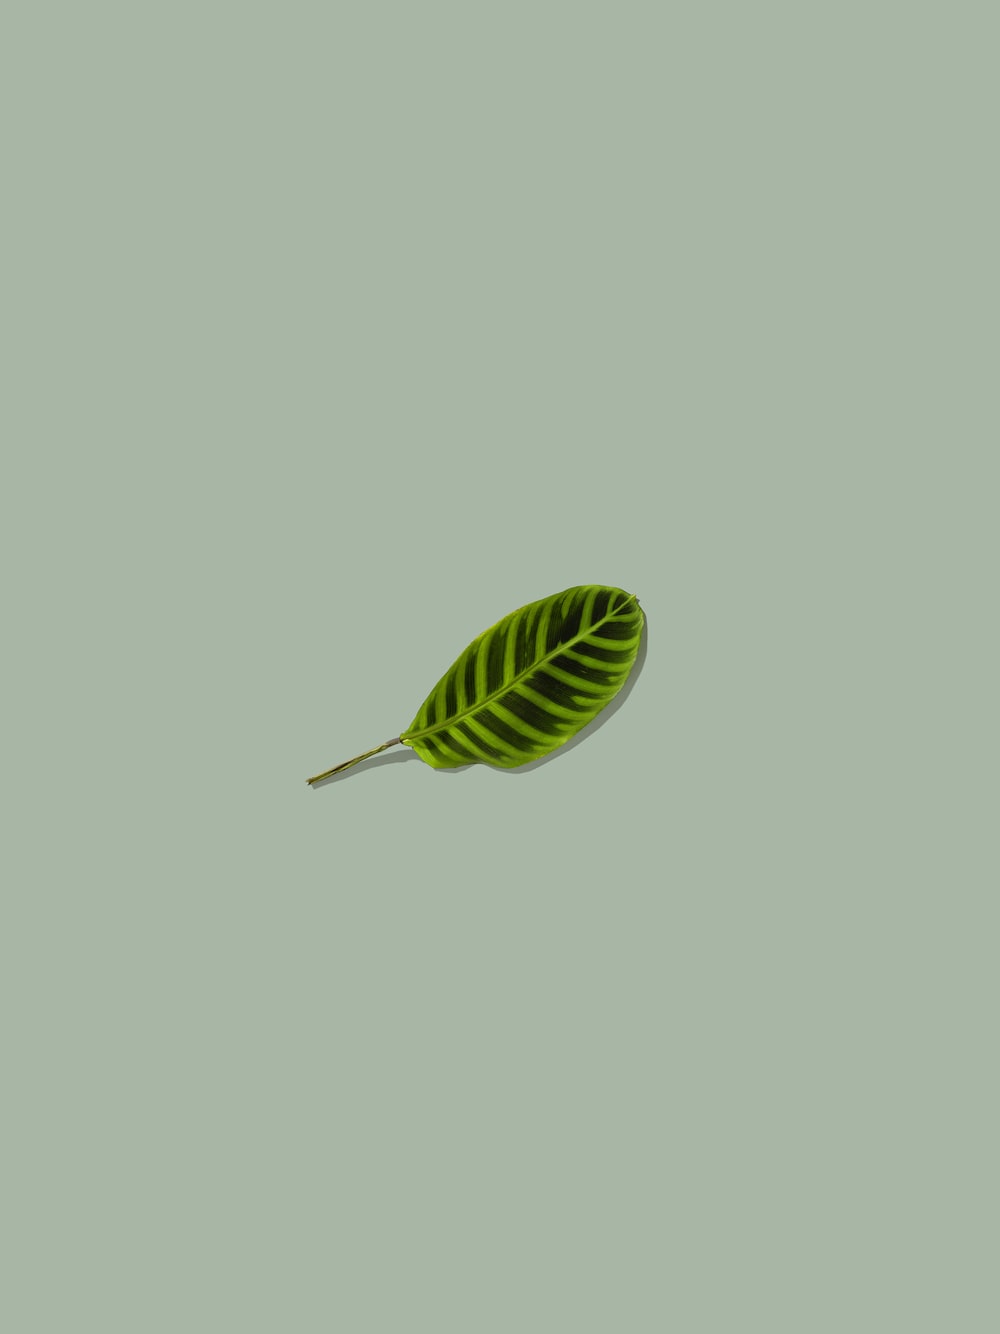 A green leaf with black stripes on a green background - Pastel green